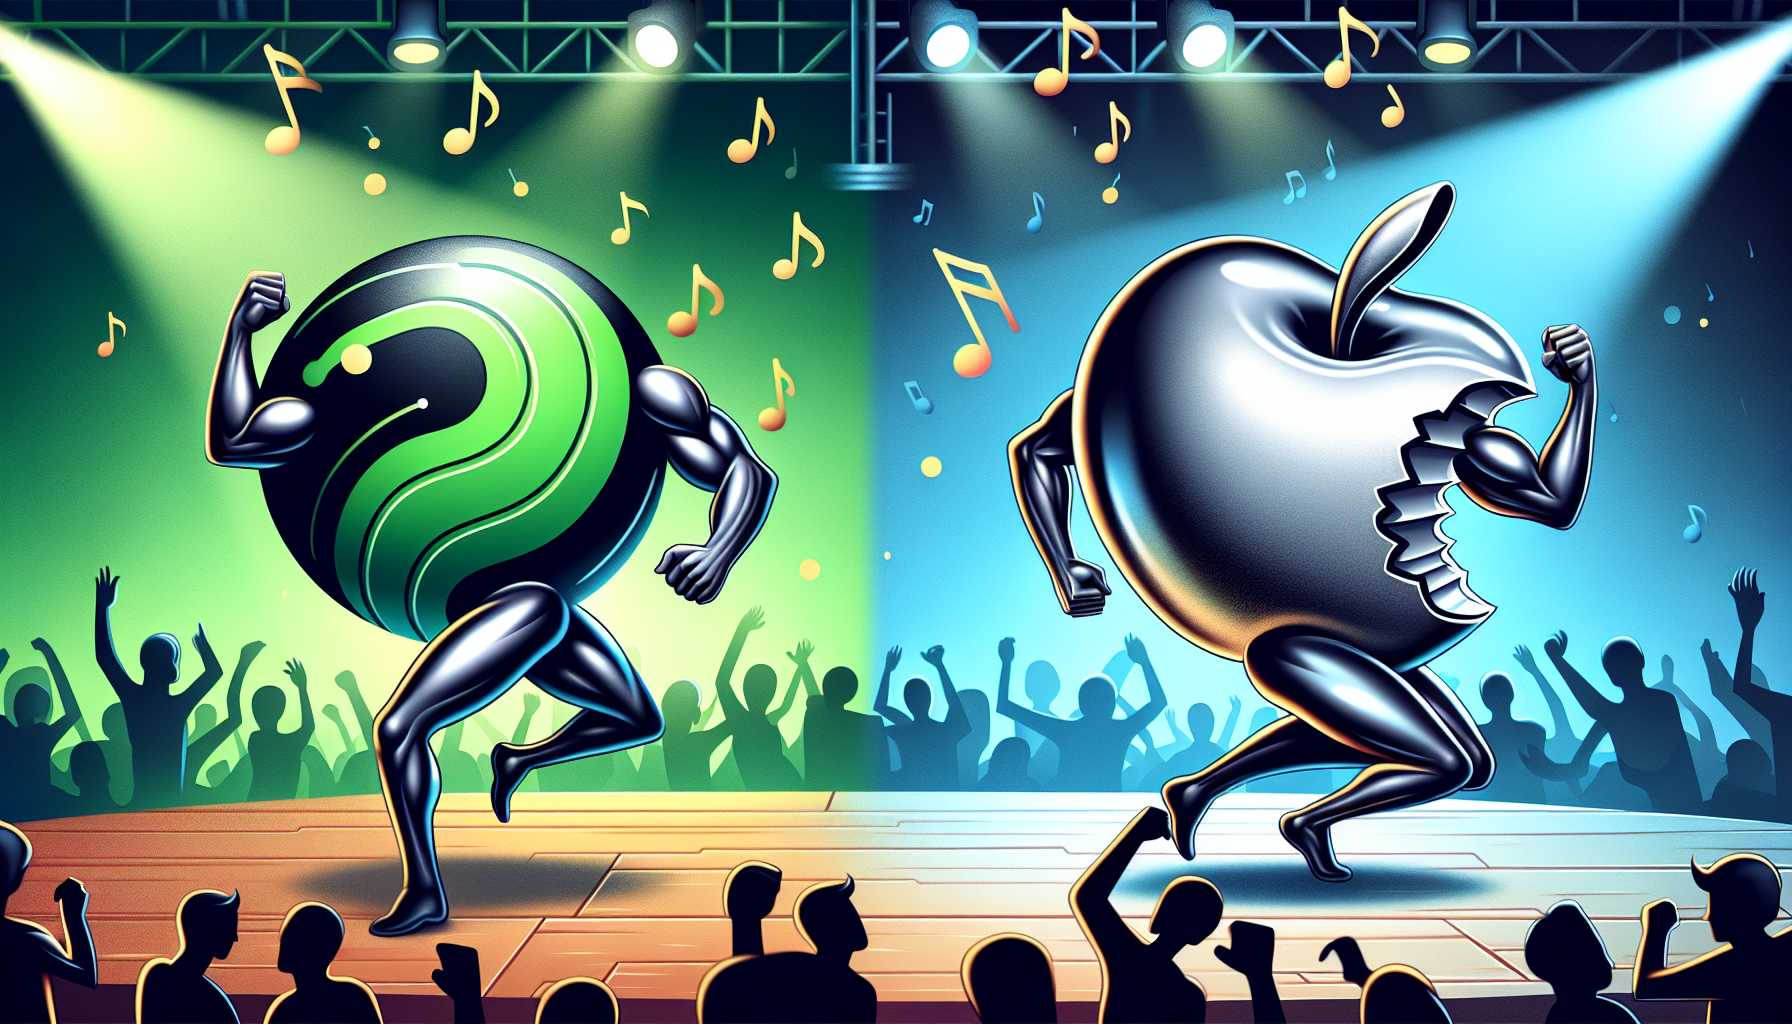 an illustration of Spotify and Apple logos in a dance competition